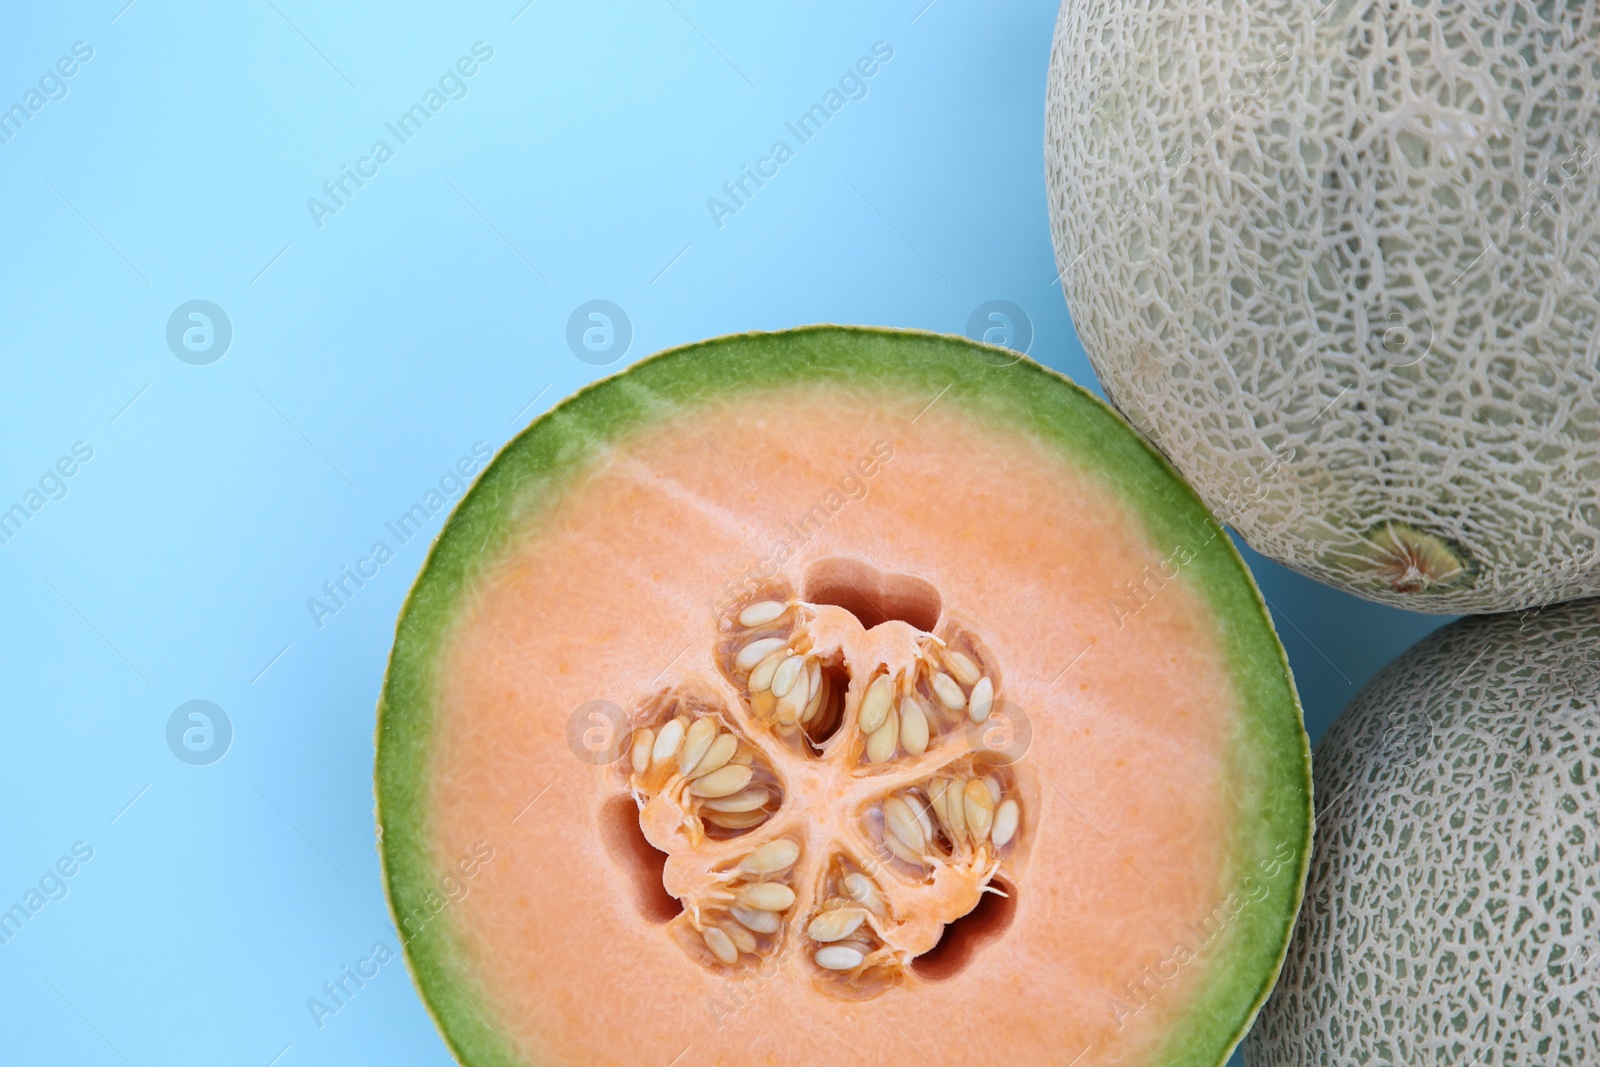 Photo of Whole and cut fresh ripe cantaloupe melons on light blue background, flat lay